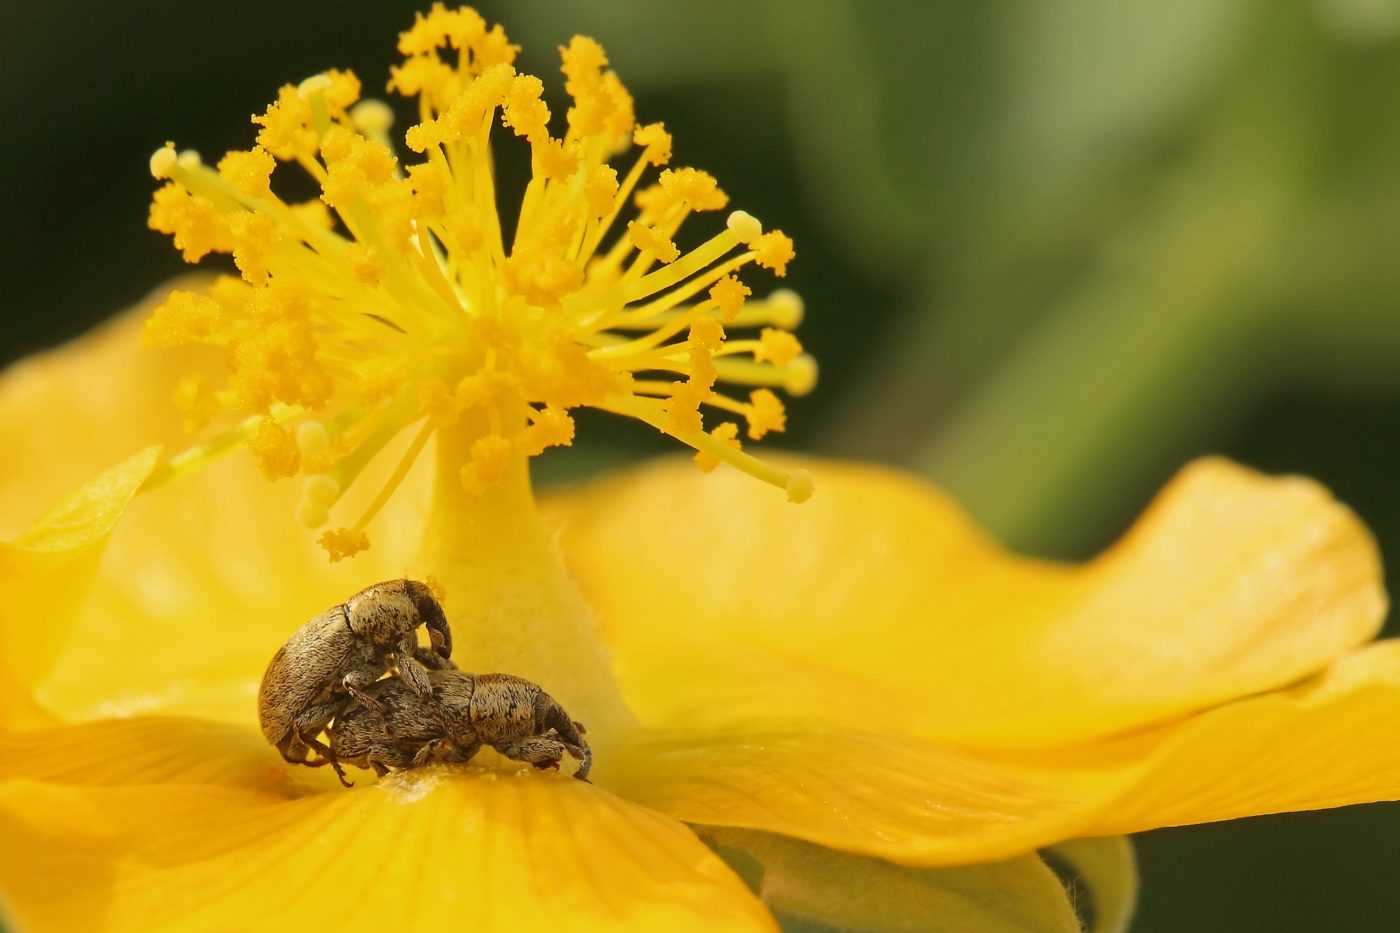 A pair of weevils mating in the seclusion of a large colourful flower in Vadodara, Gujarat.